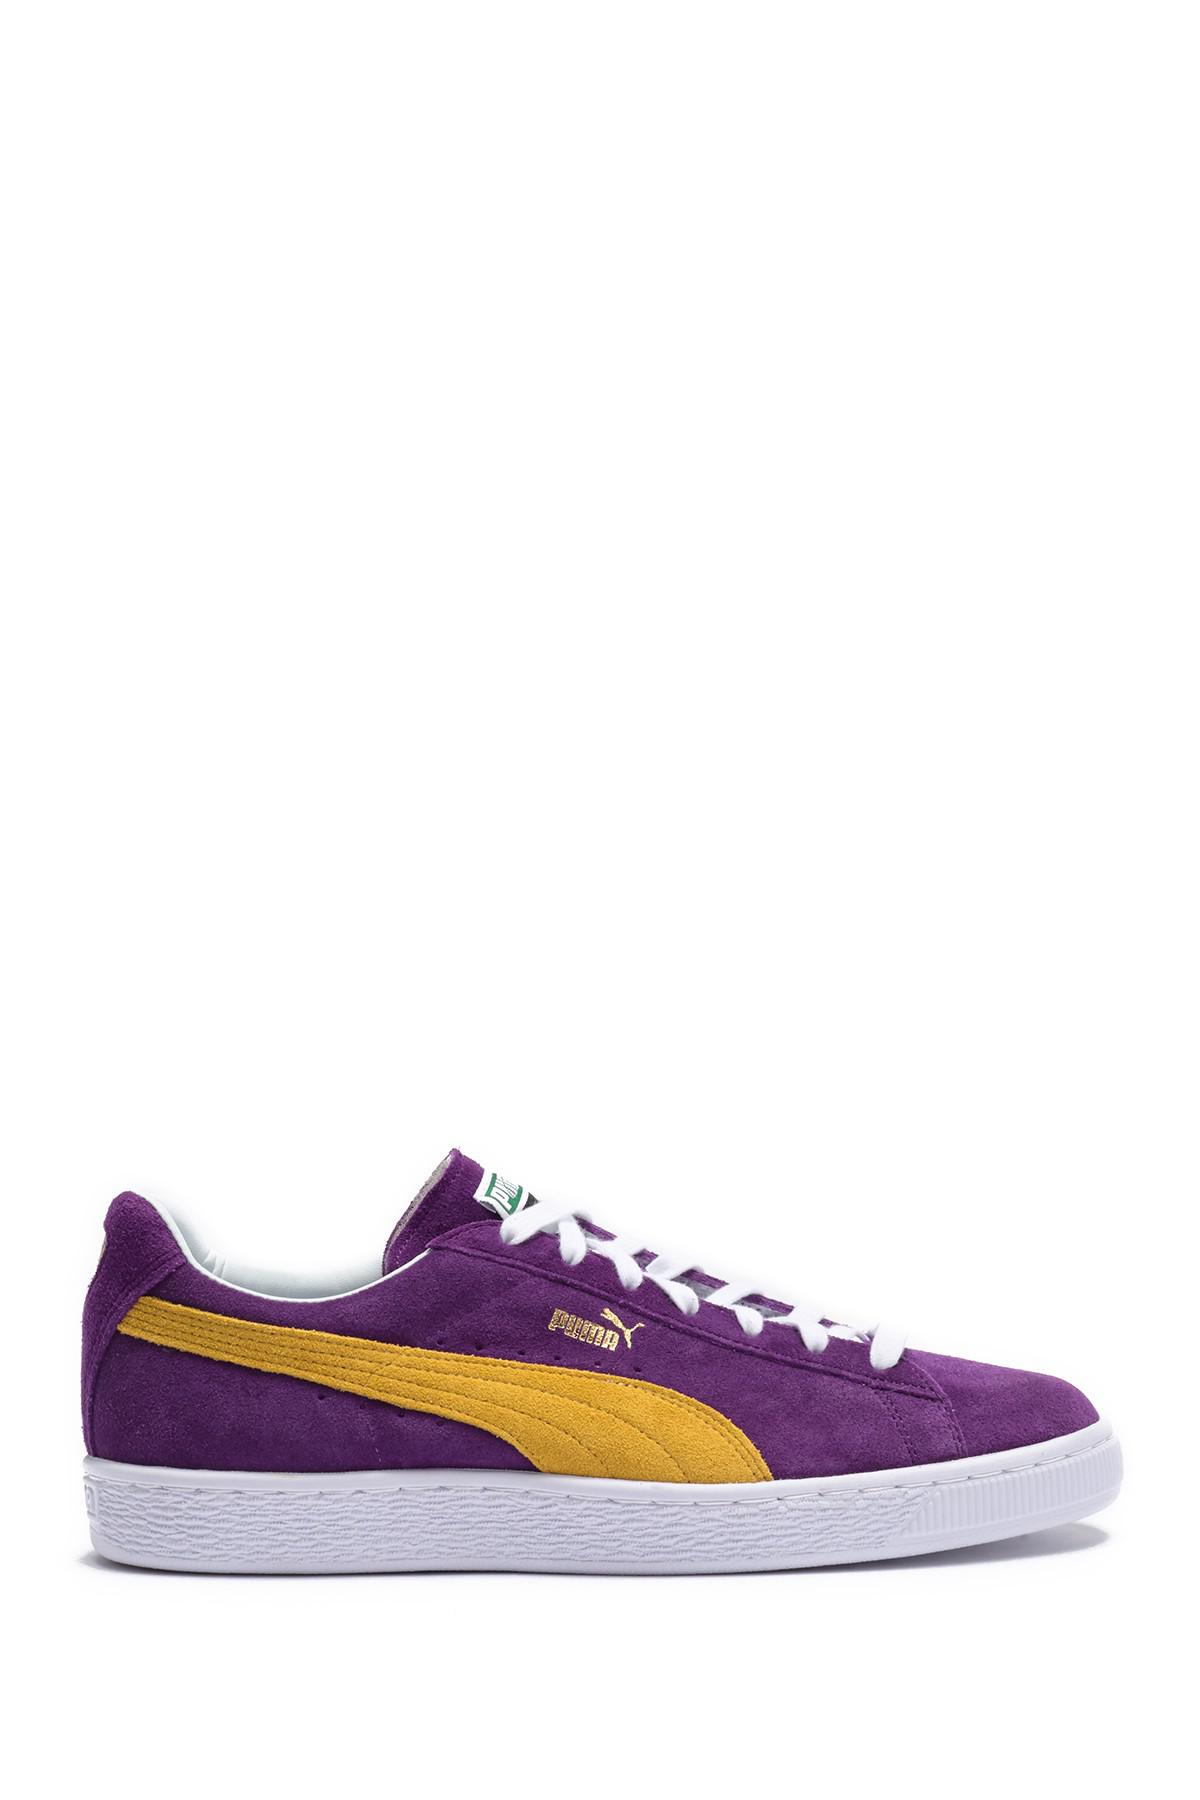 PUMA Suede Classic X Collectors (heliotrope/spectra Yellow) Shoes in Purple  for Men - Lyst